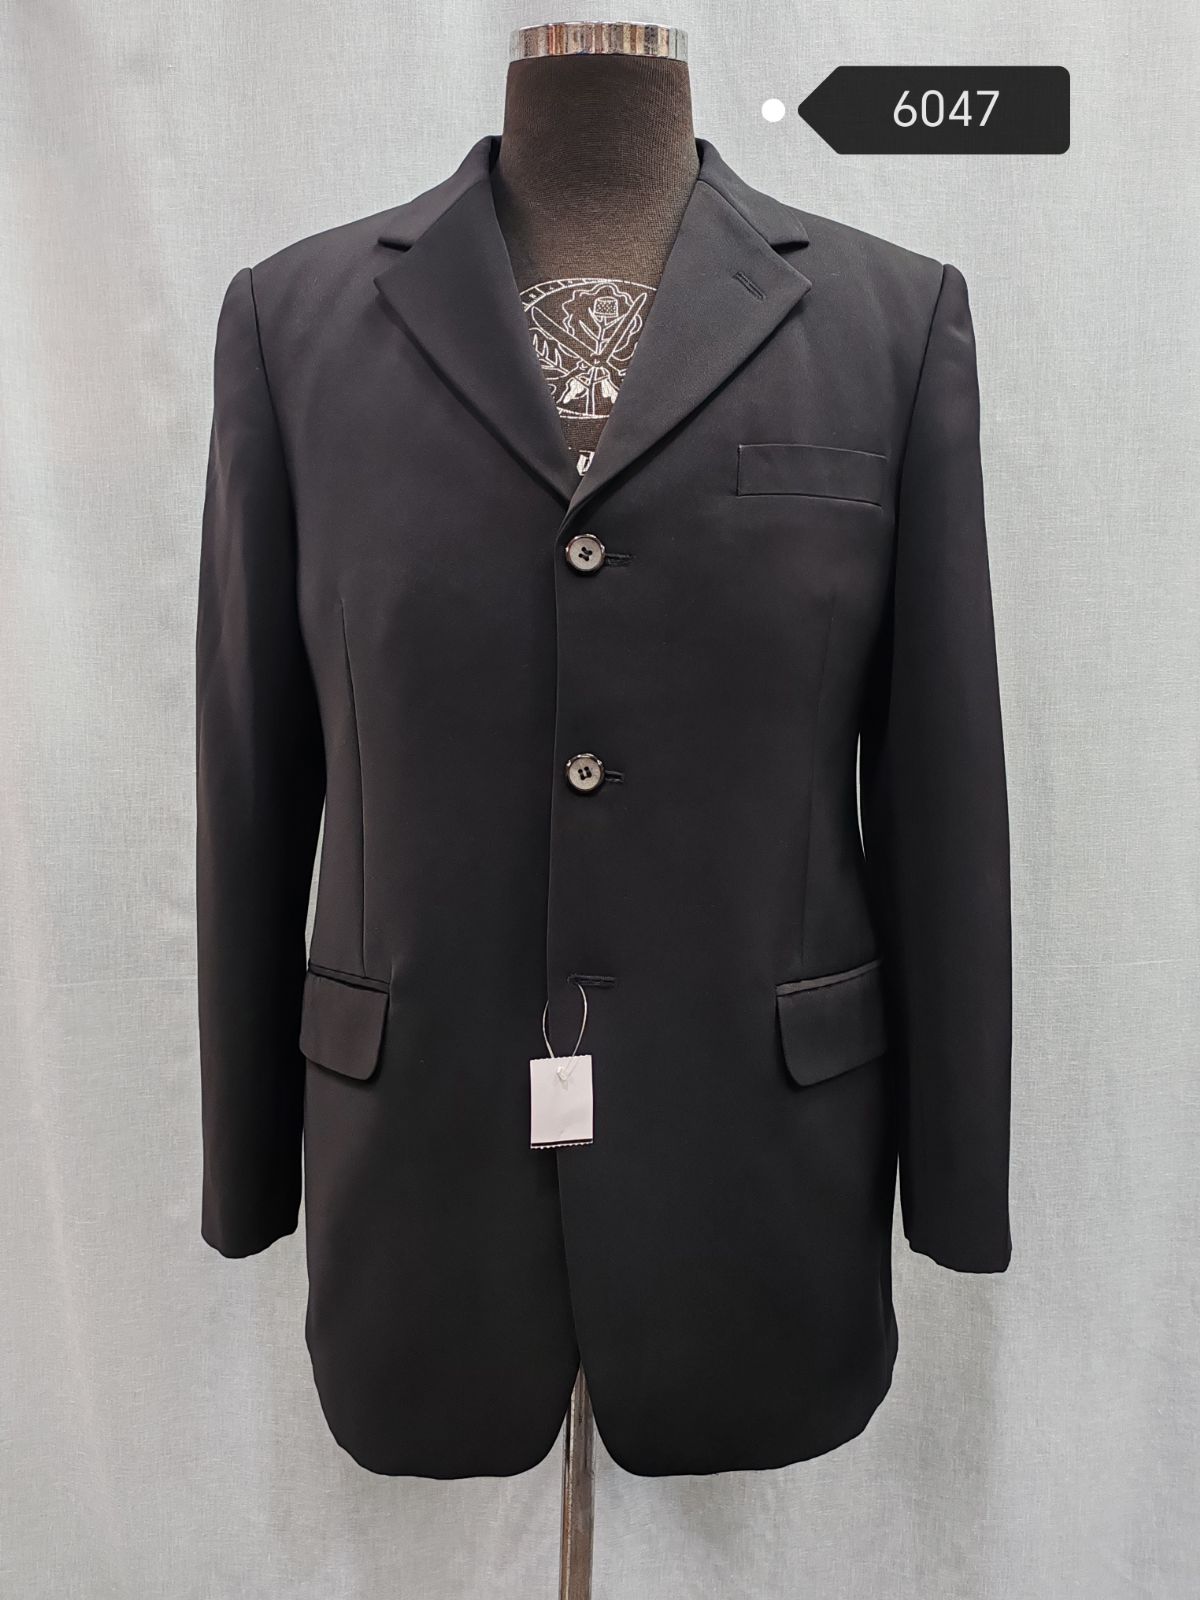 *6047* Readymade Suits for Sales